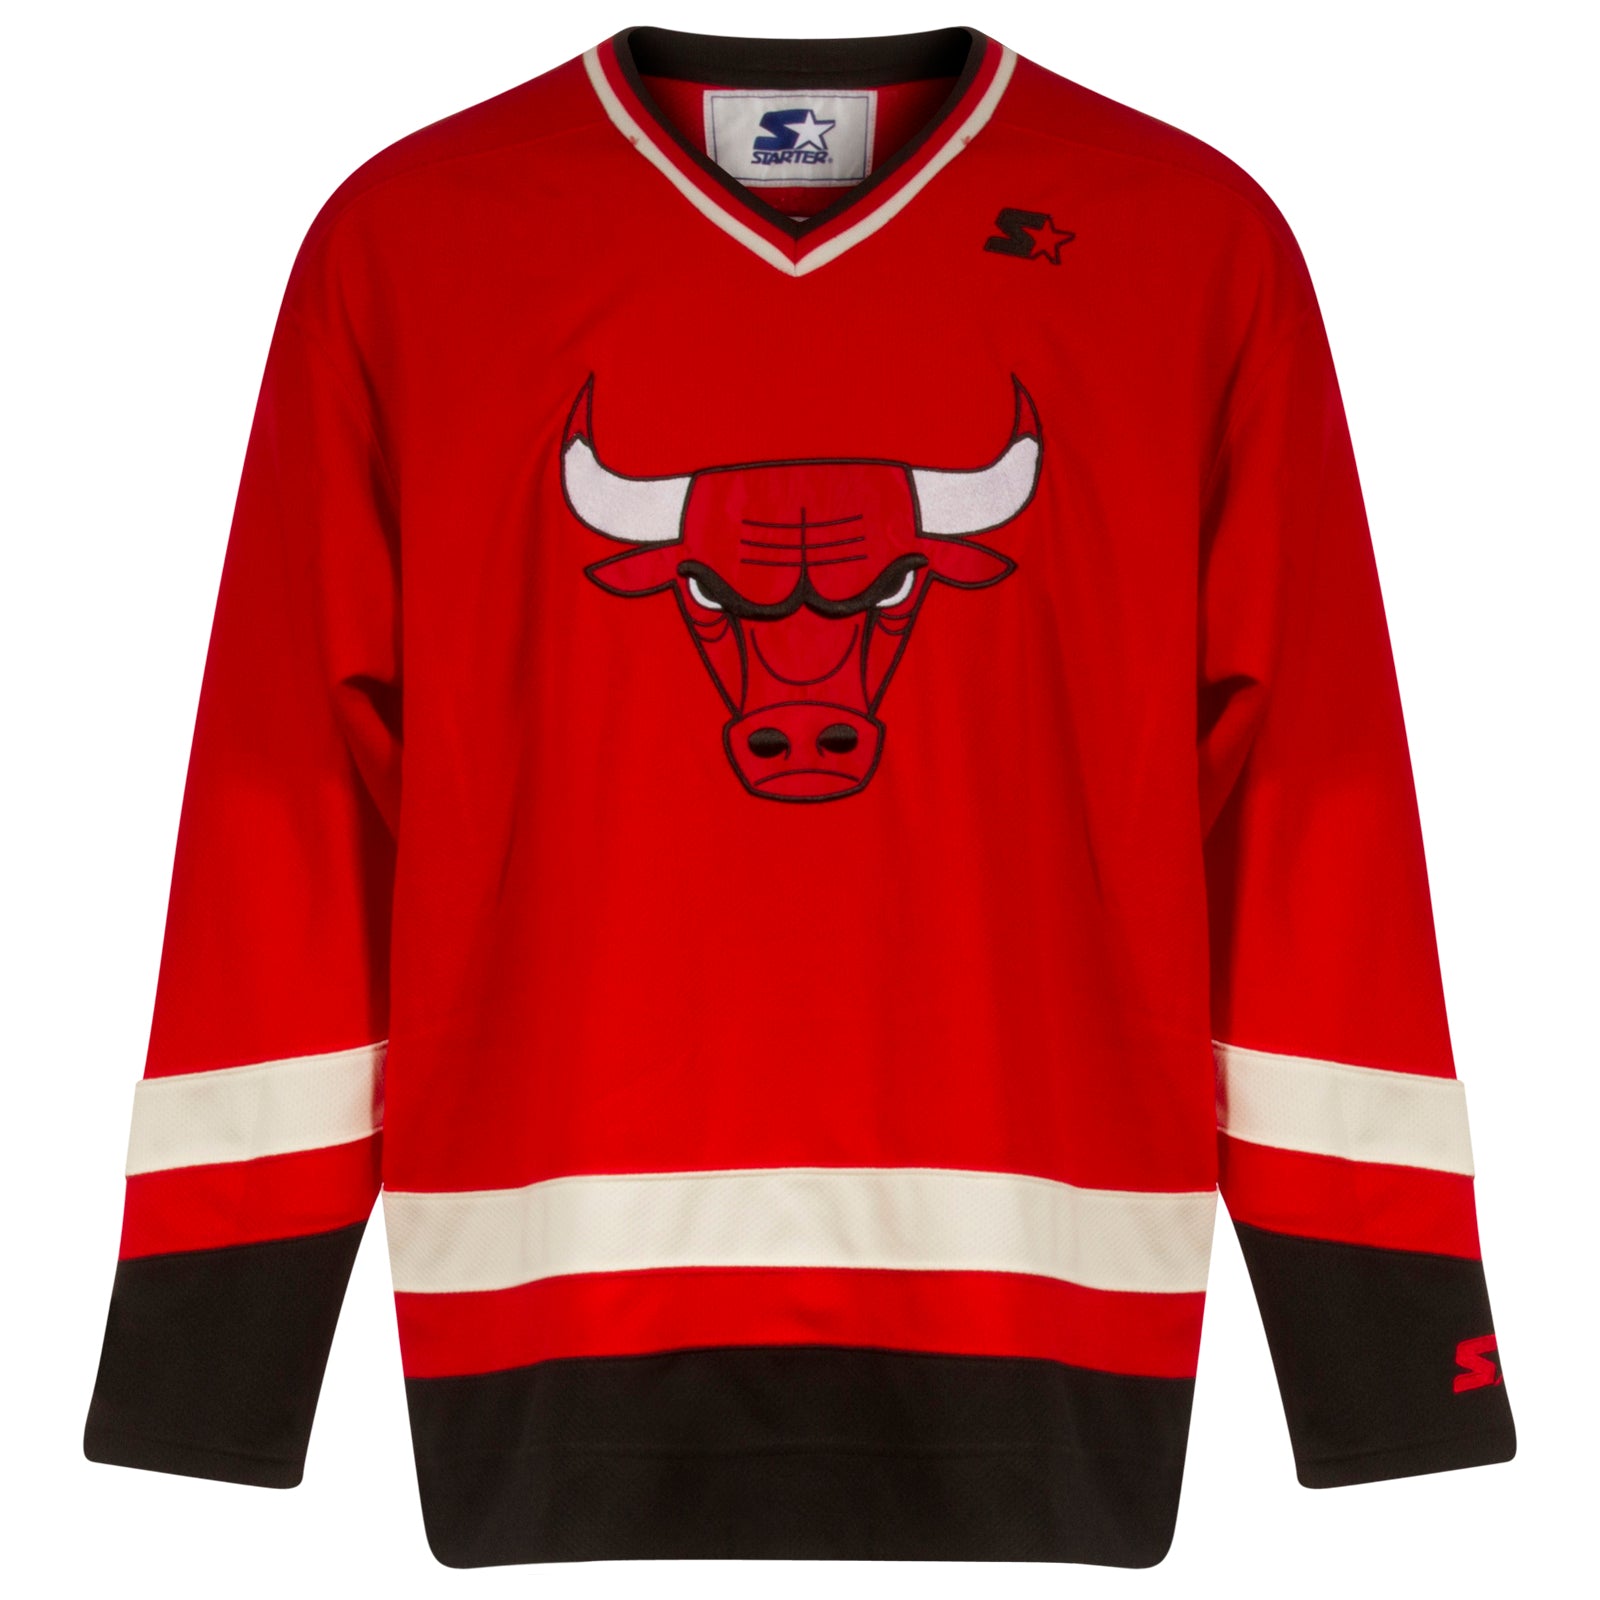 black and red bulls jersey